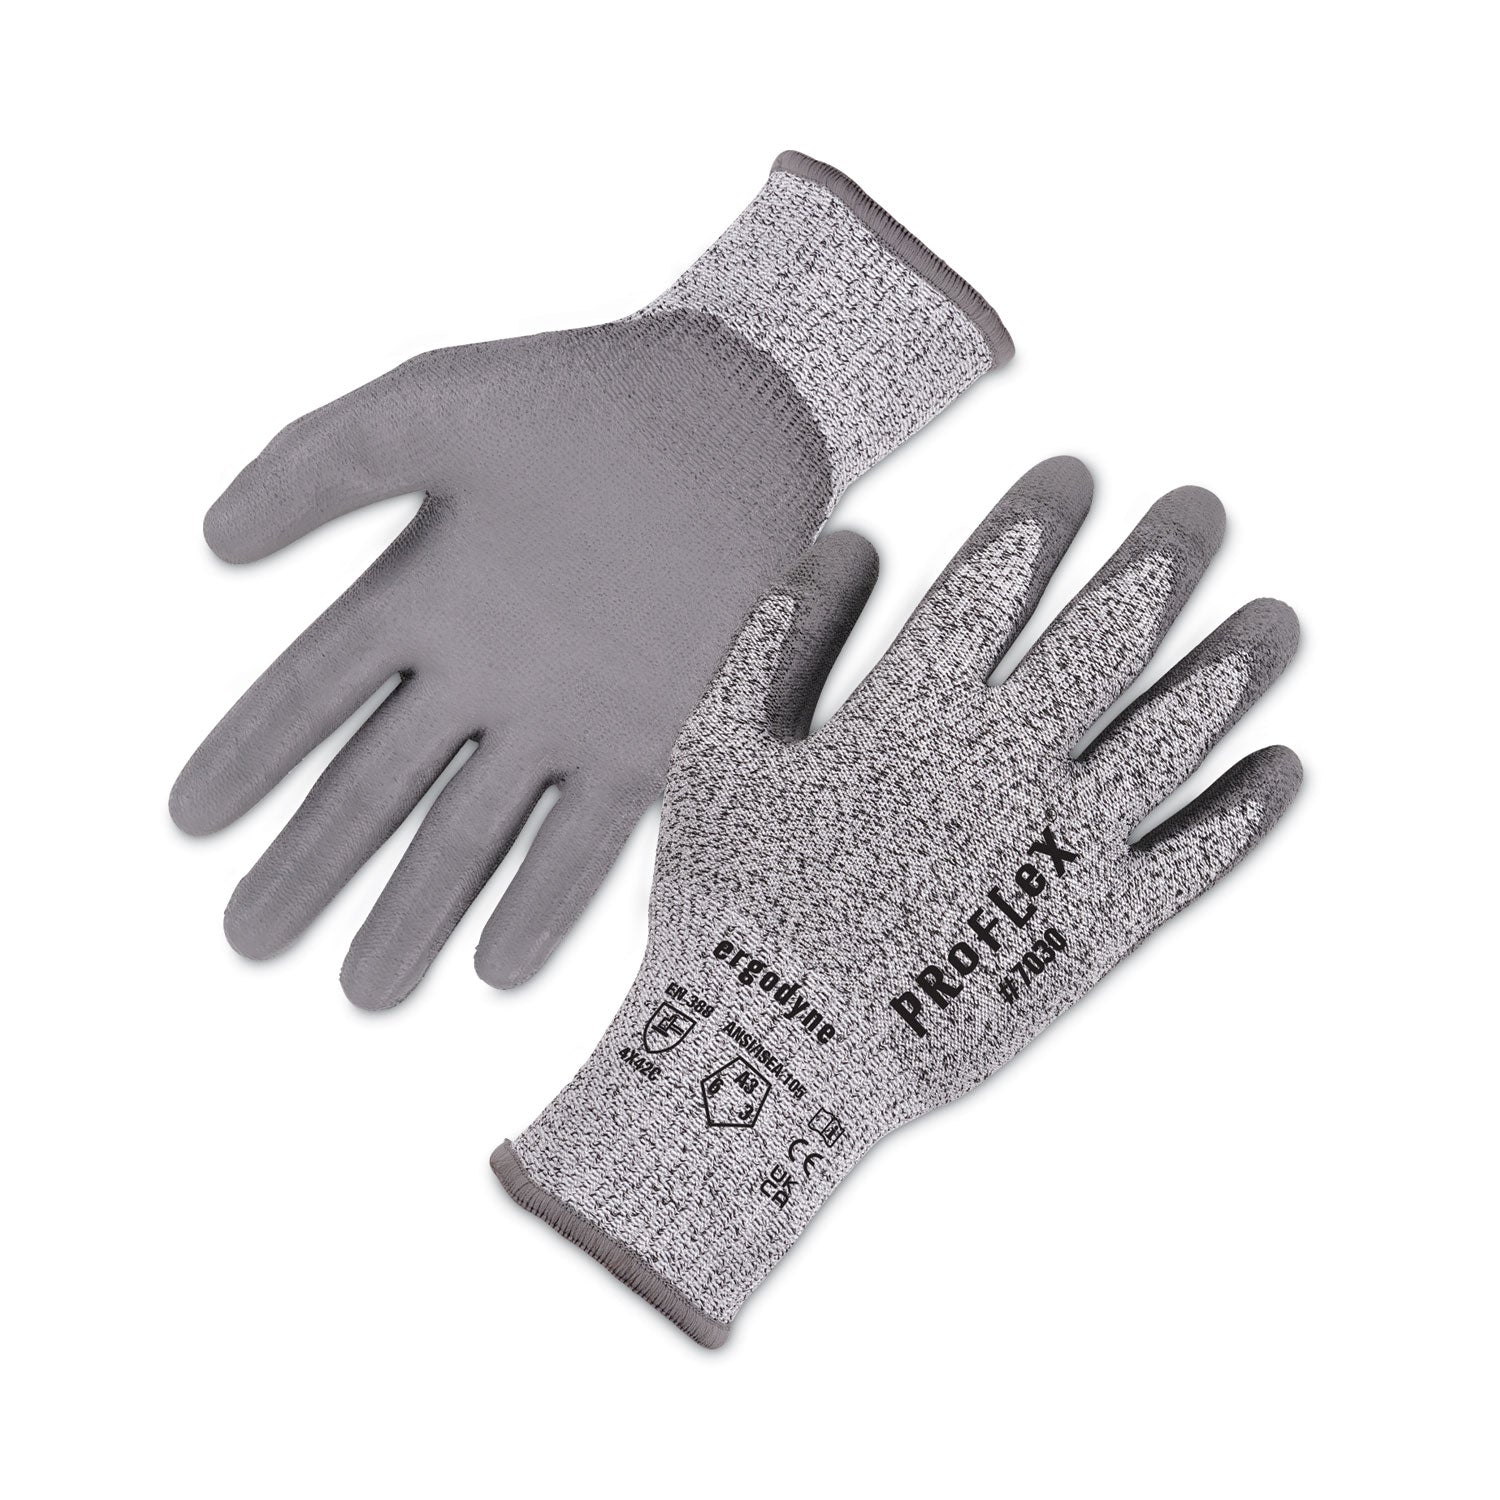 proflex-7030-ansi-a3-pu-coated-cr-gloves-gray-small-12-pairs-pack-ships-in-1-3-business-days_ego10452 - 1